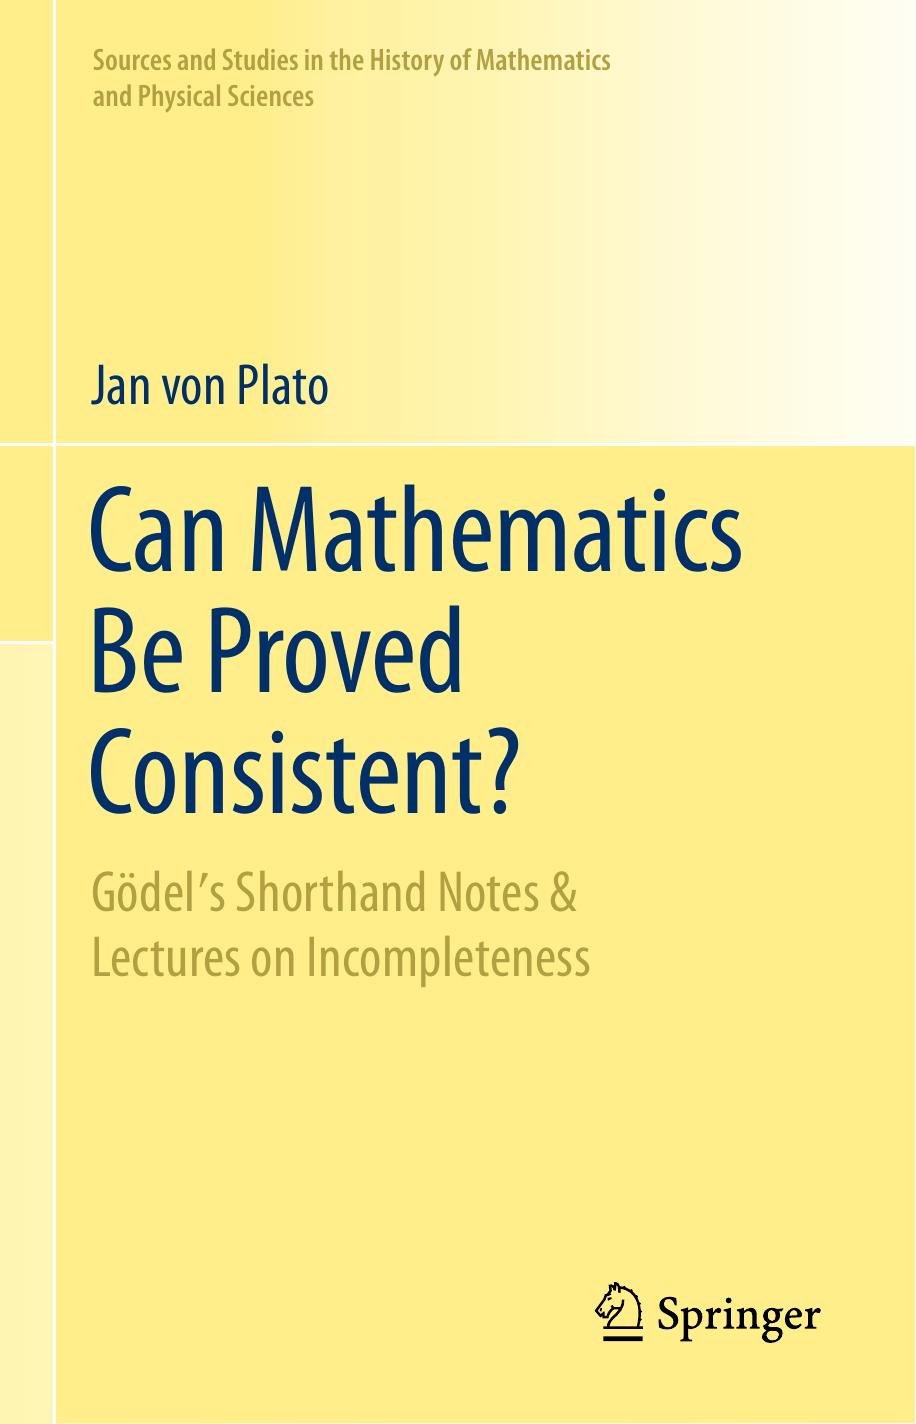 Can Mathematics Be Proved Consistent?: Gödel's Shorthand Notes & Lectures on Incompleteness